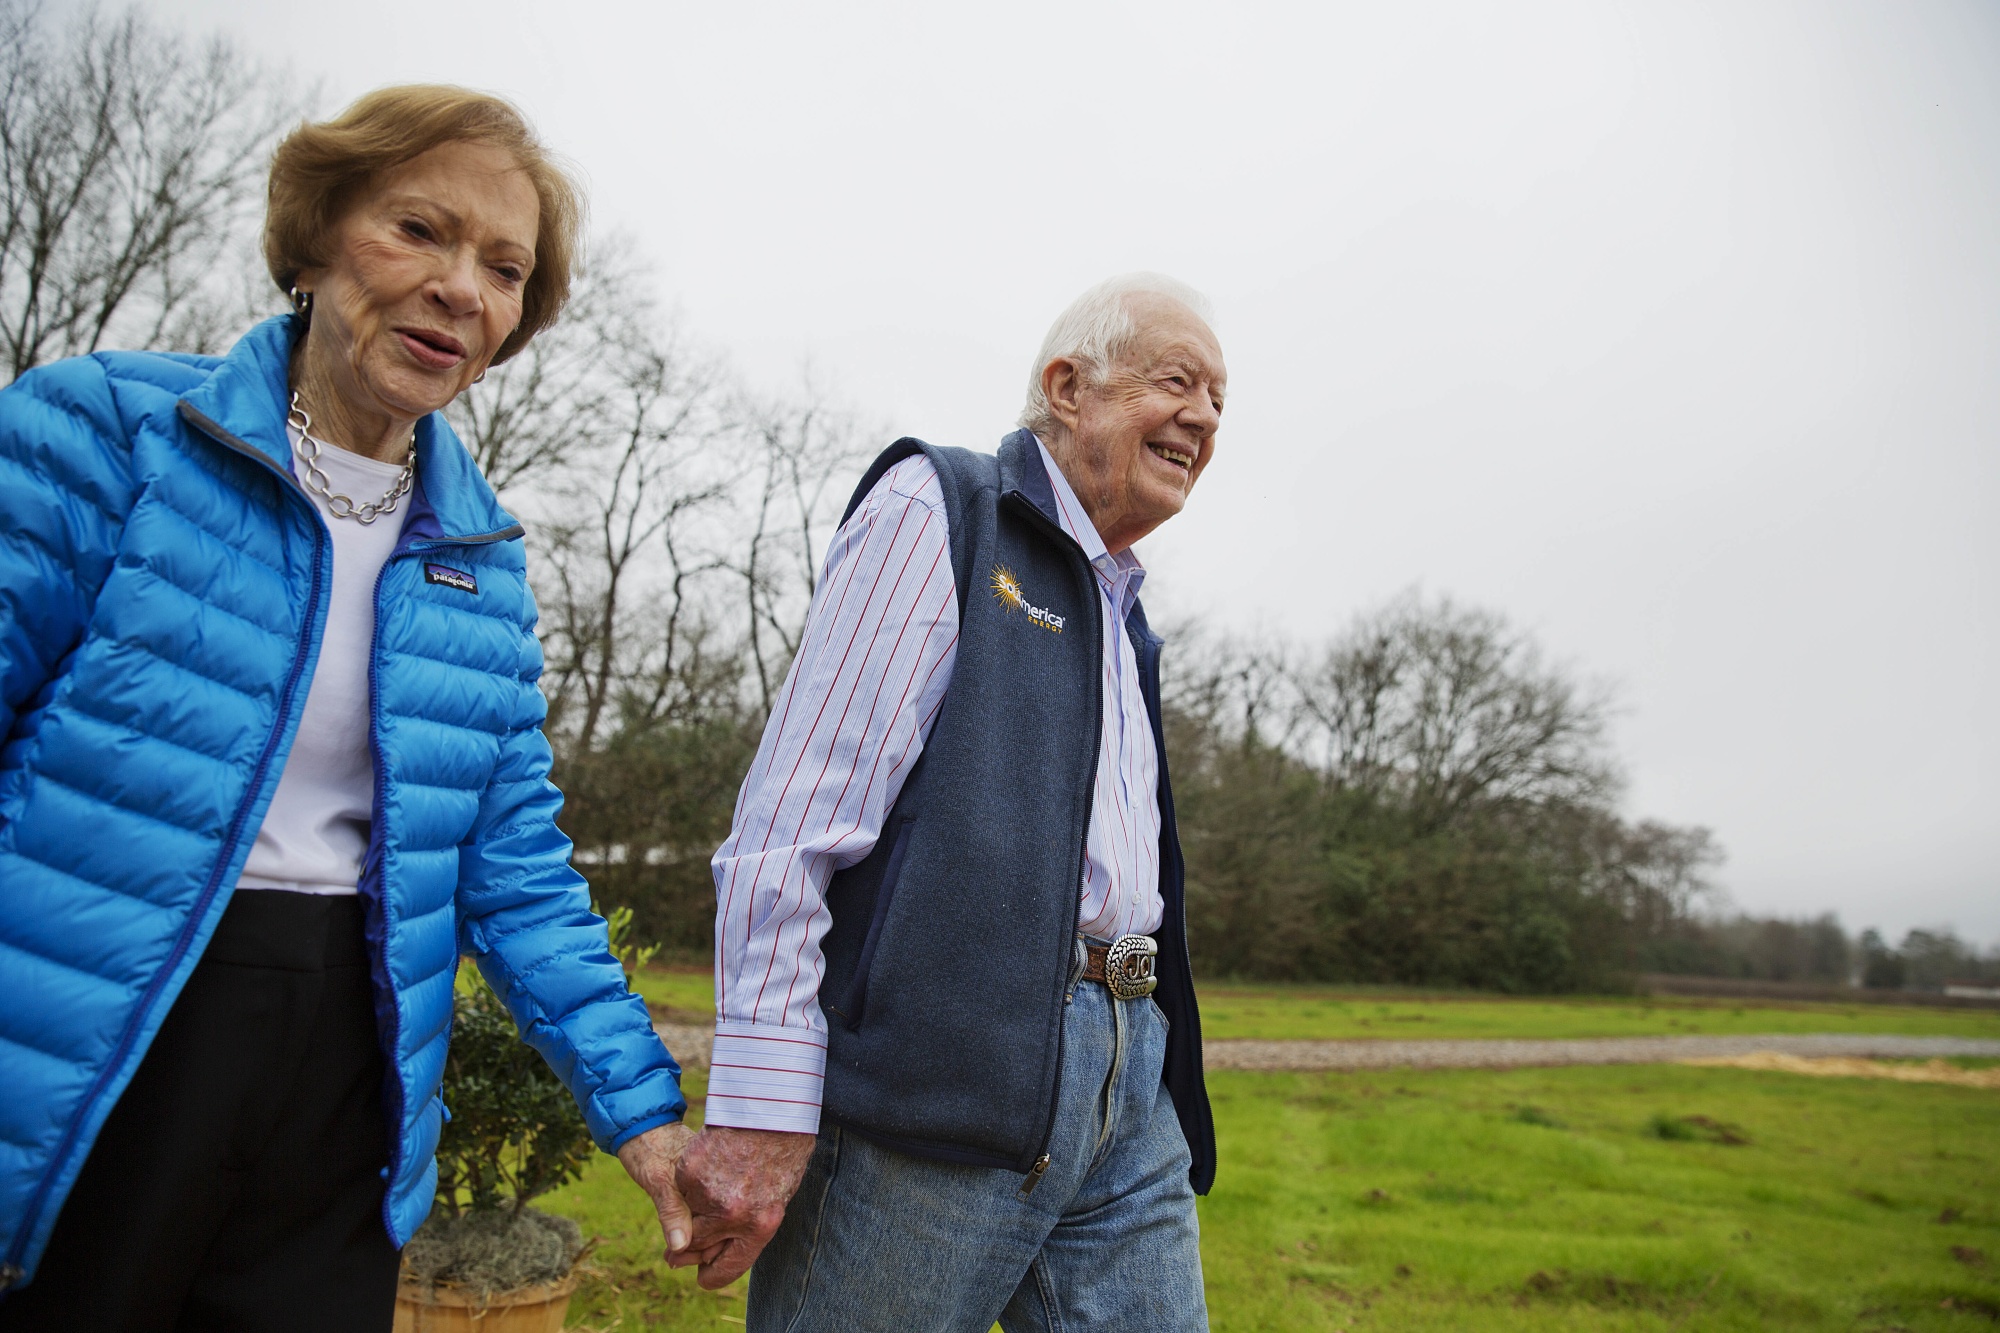 Jimmy Carter and his wife Rosalynn arrive for a ribbon-cutting ceremony for a solar project in Plains, Georgia, in 2017.